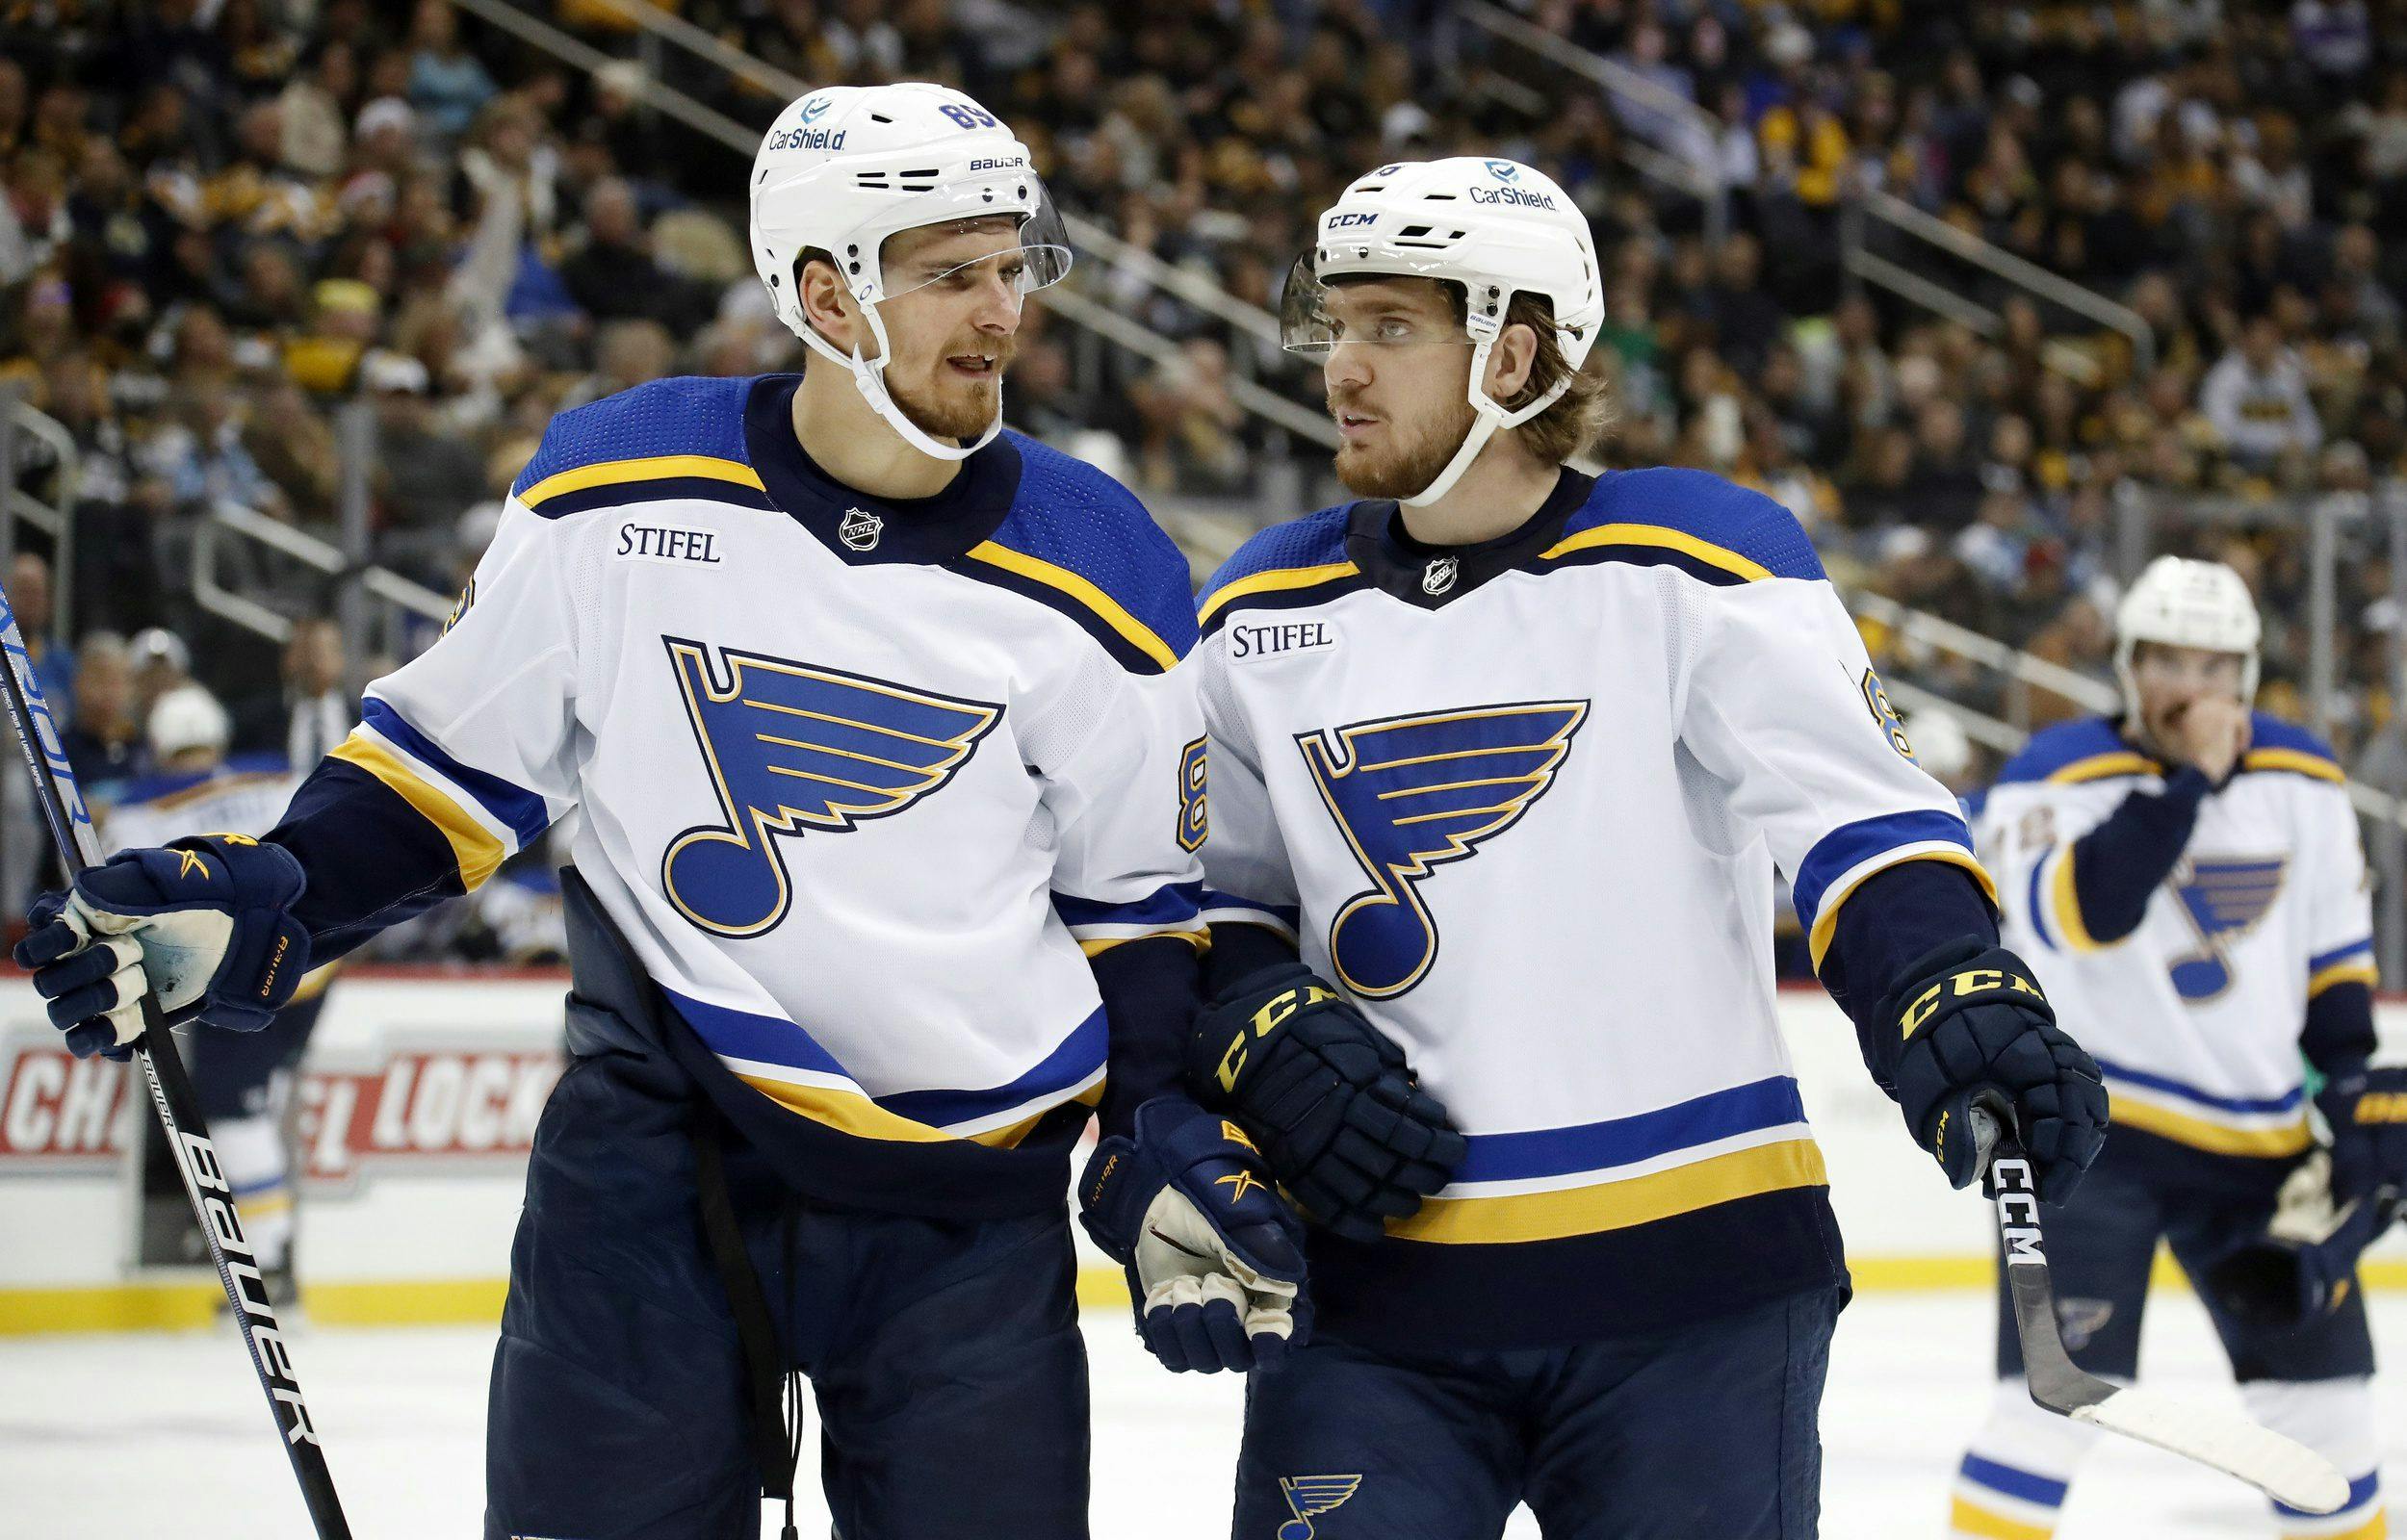 St. Louis Blues’ Robert Thomas and Pavel Buchnevich to miss Thursday’s game vs. Blackhawks with upper-body injuries